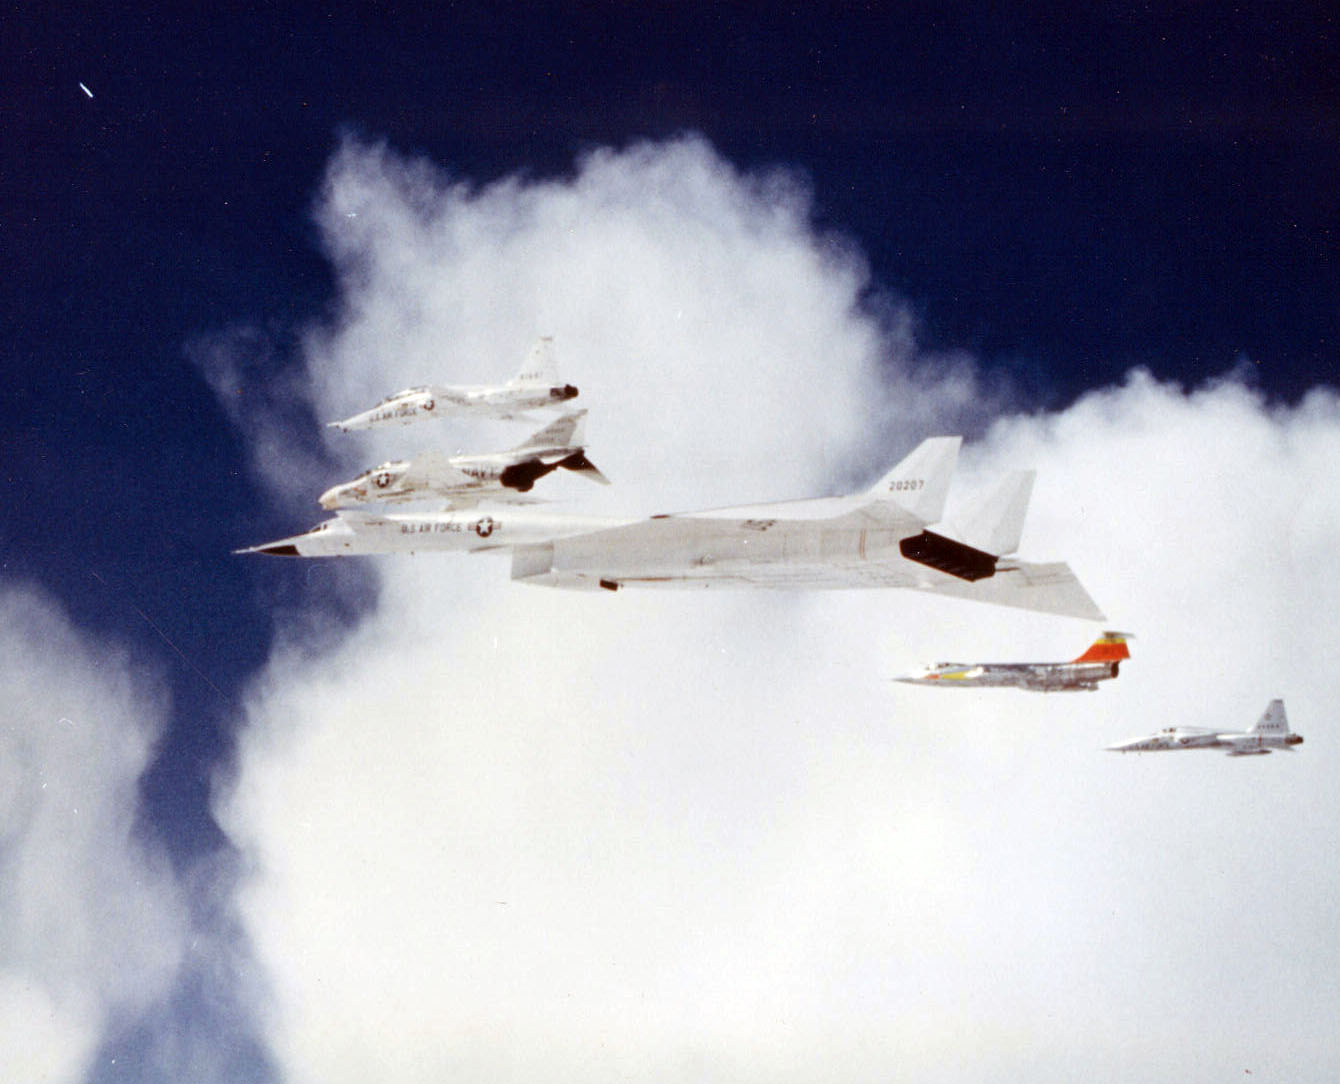 Formation of U.S. aircraft for a photoshoot